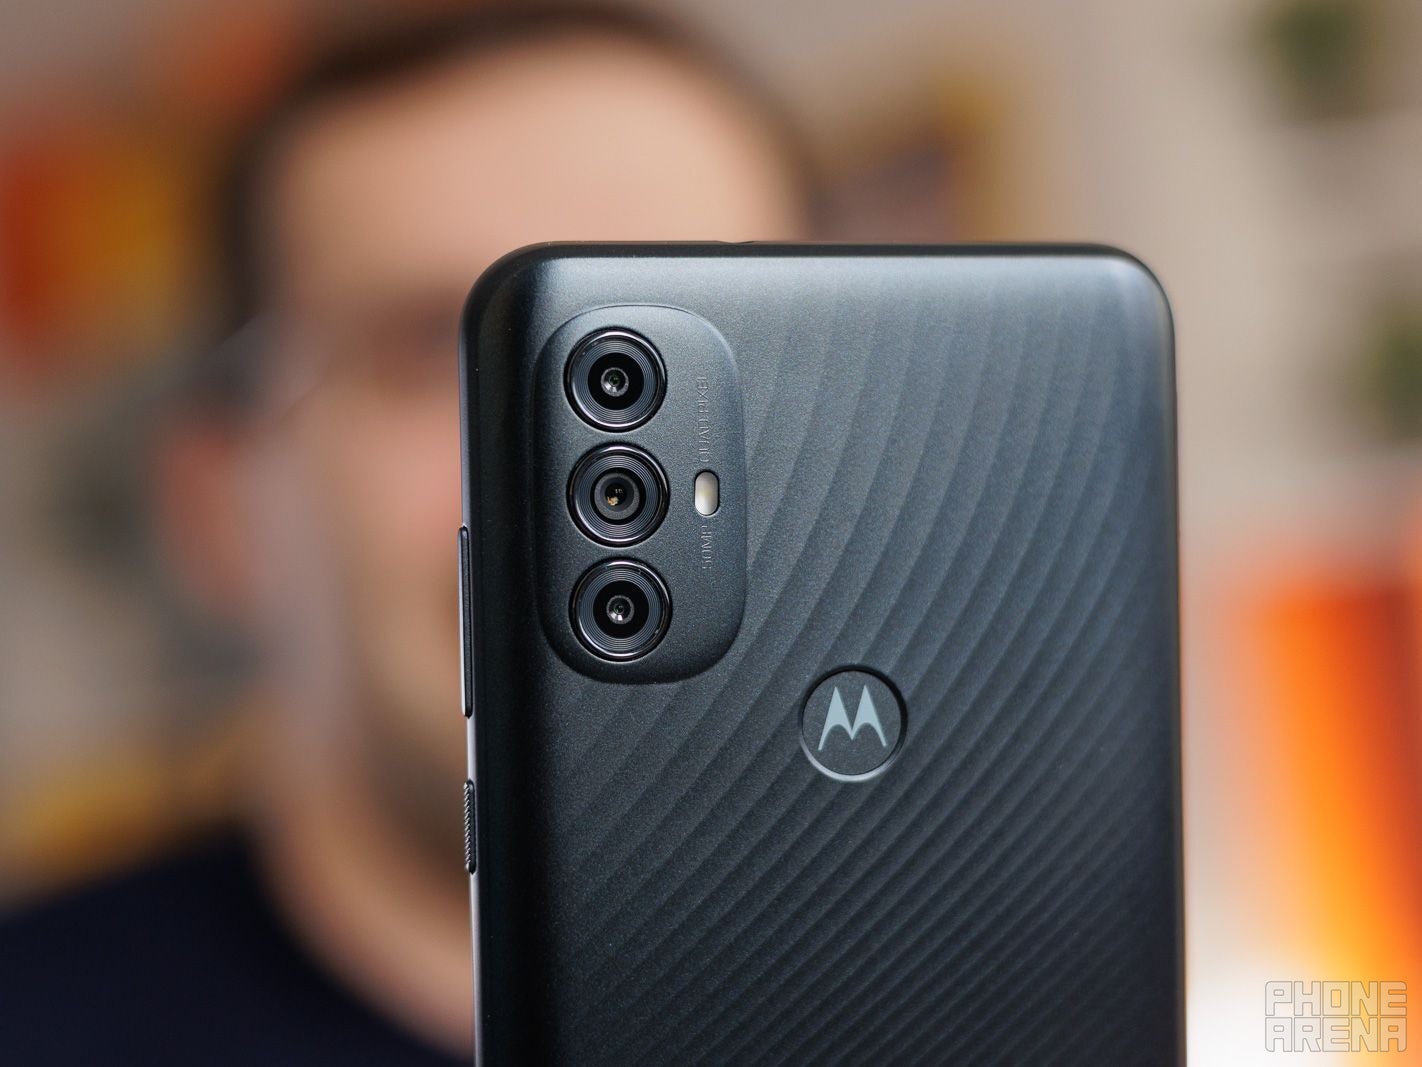 drops the Prime Exclusive 64GB/4GB Moto G6 to $180 ($120 off)